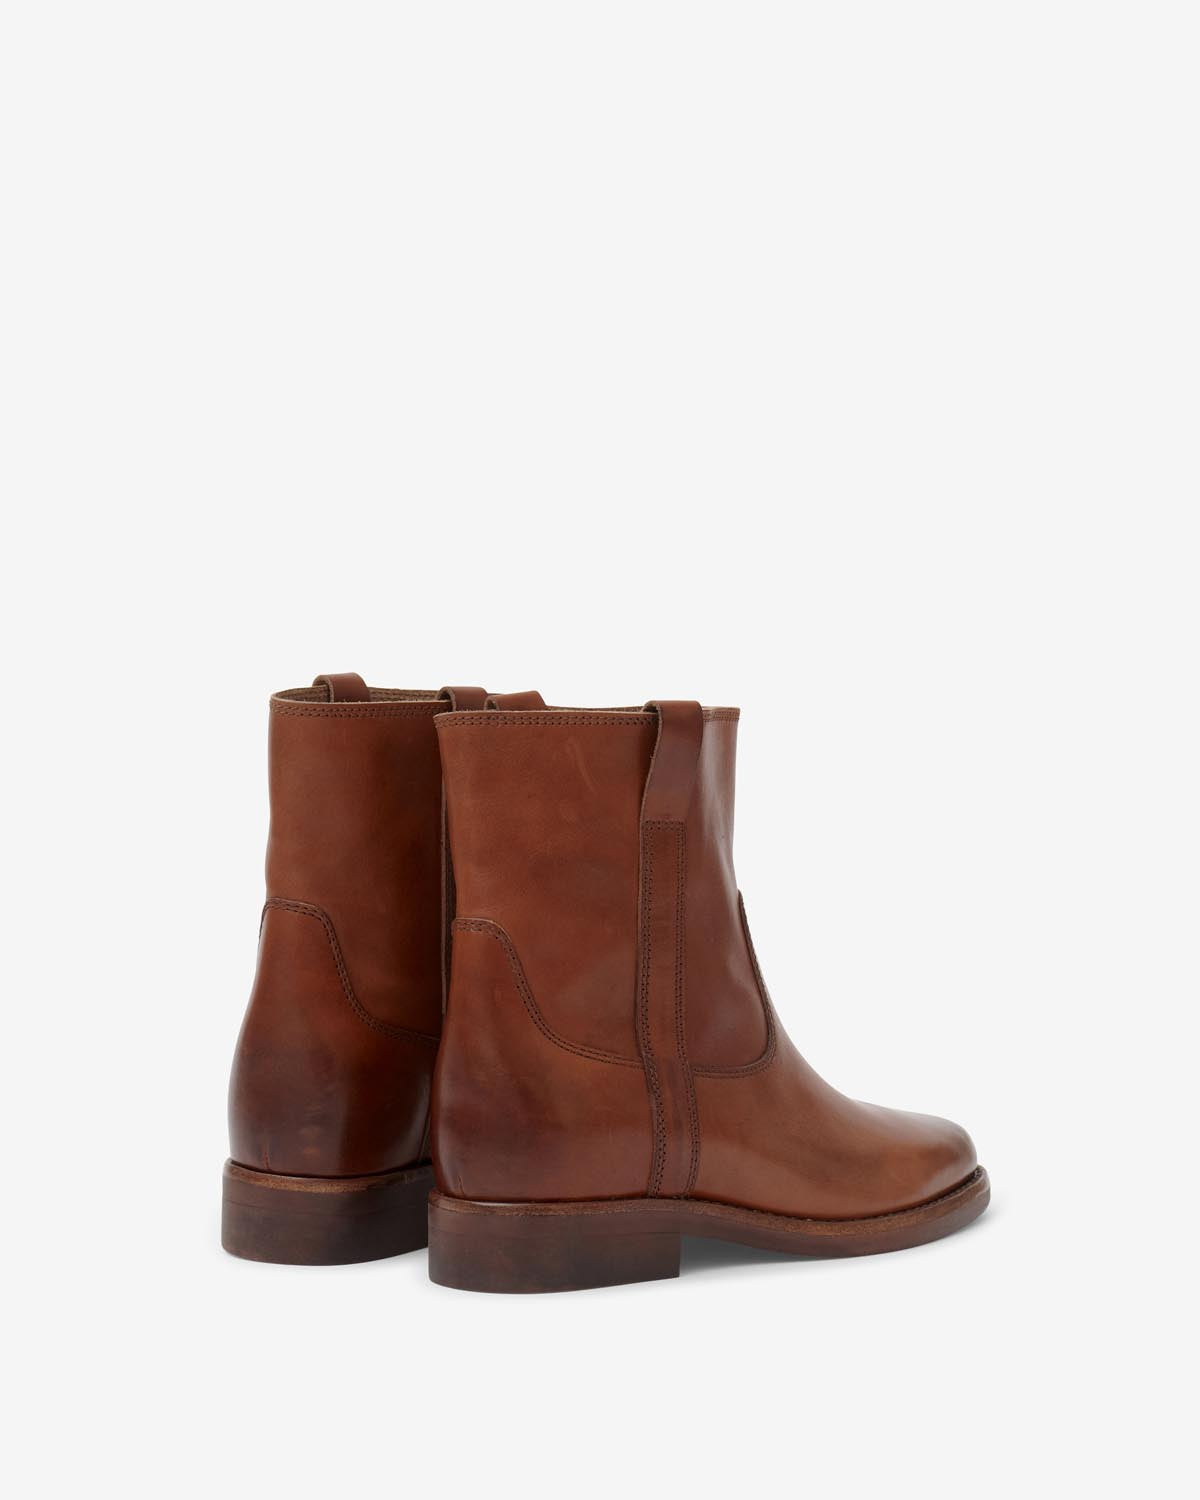 Boots susee Woman Cognac 4